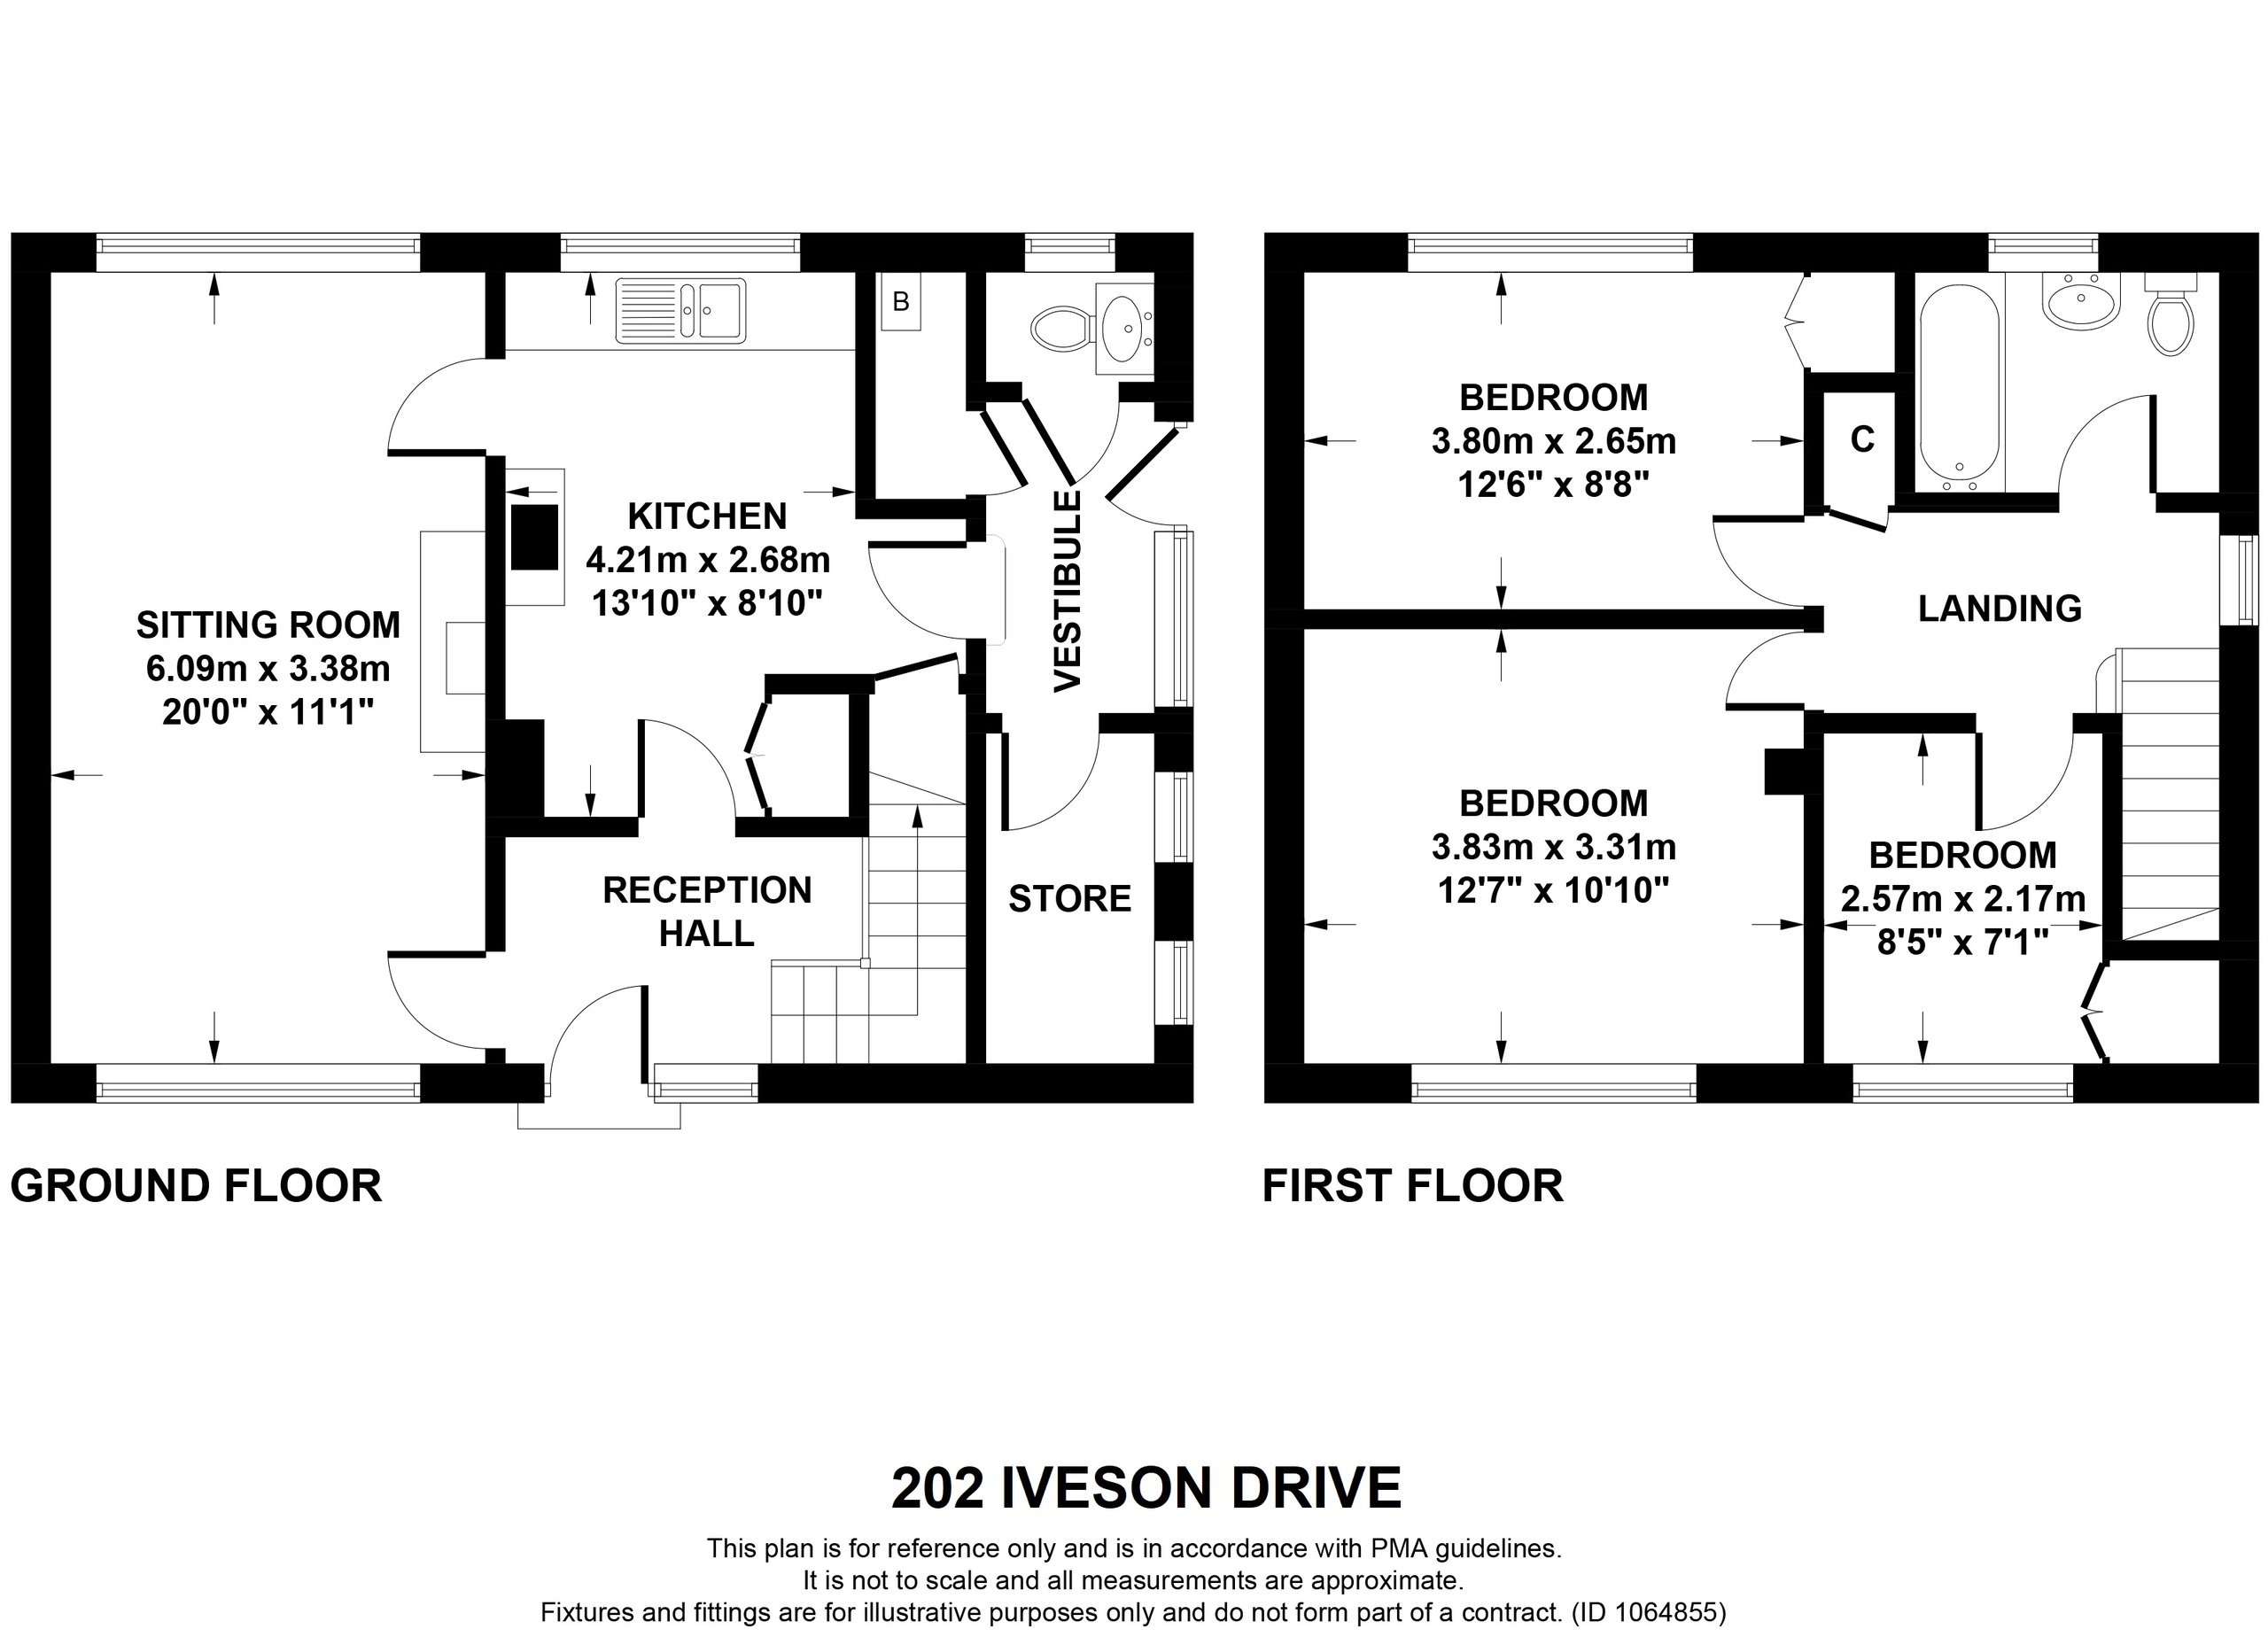 3 bed semi-detached house to rent in Iveson Drive, Leeds - Property floorplan